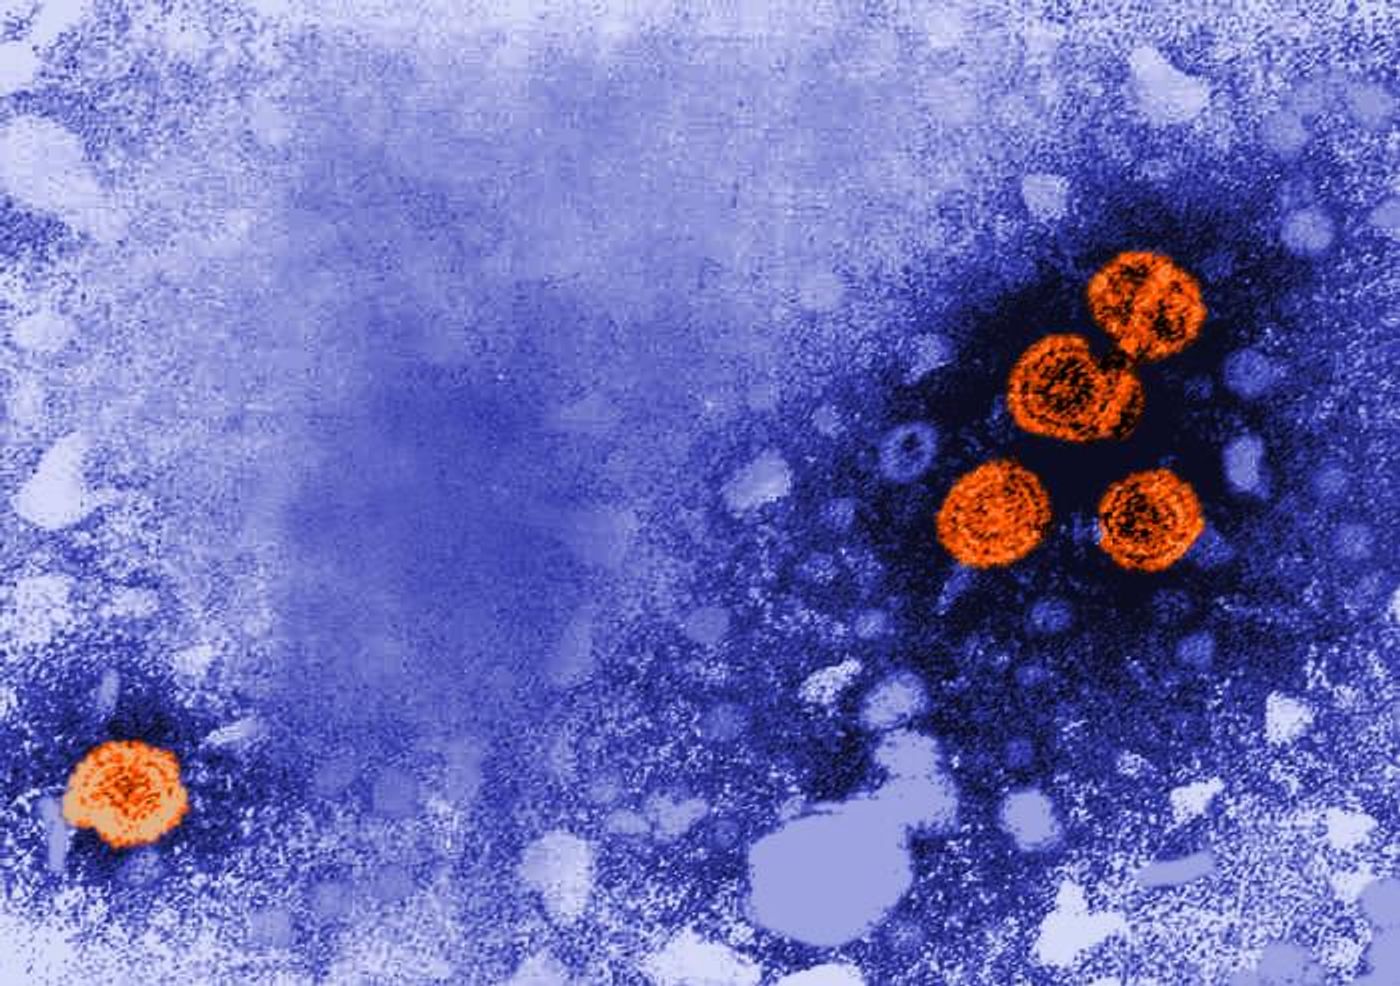 This TEM image revealed the presence of hepatitis B virus (HBV) particles (orange). The round virions, which measure 42nm in diameter, are known as Dane particles. / Credits: CDC/ Dr. Erskine Palmer